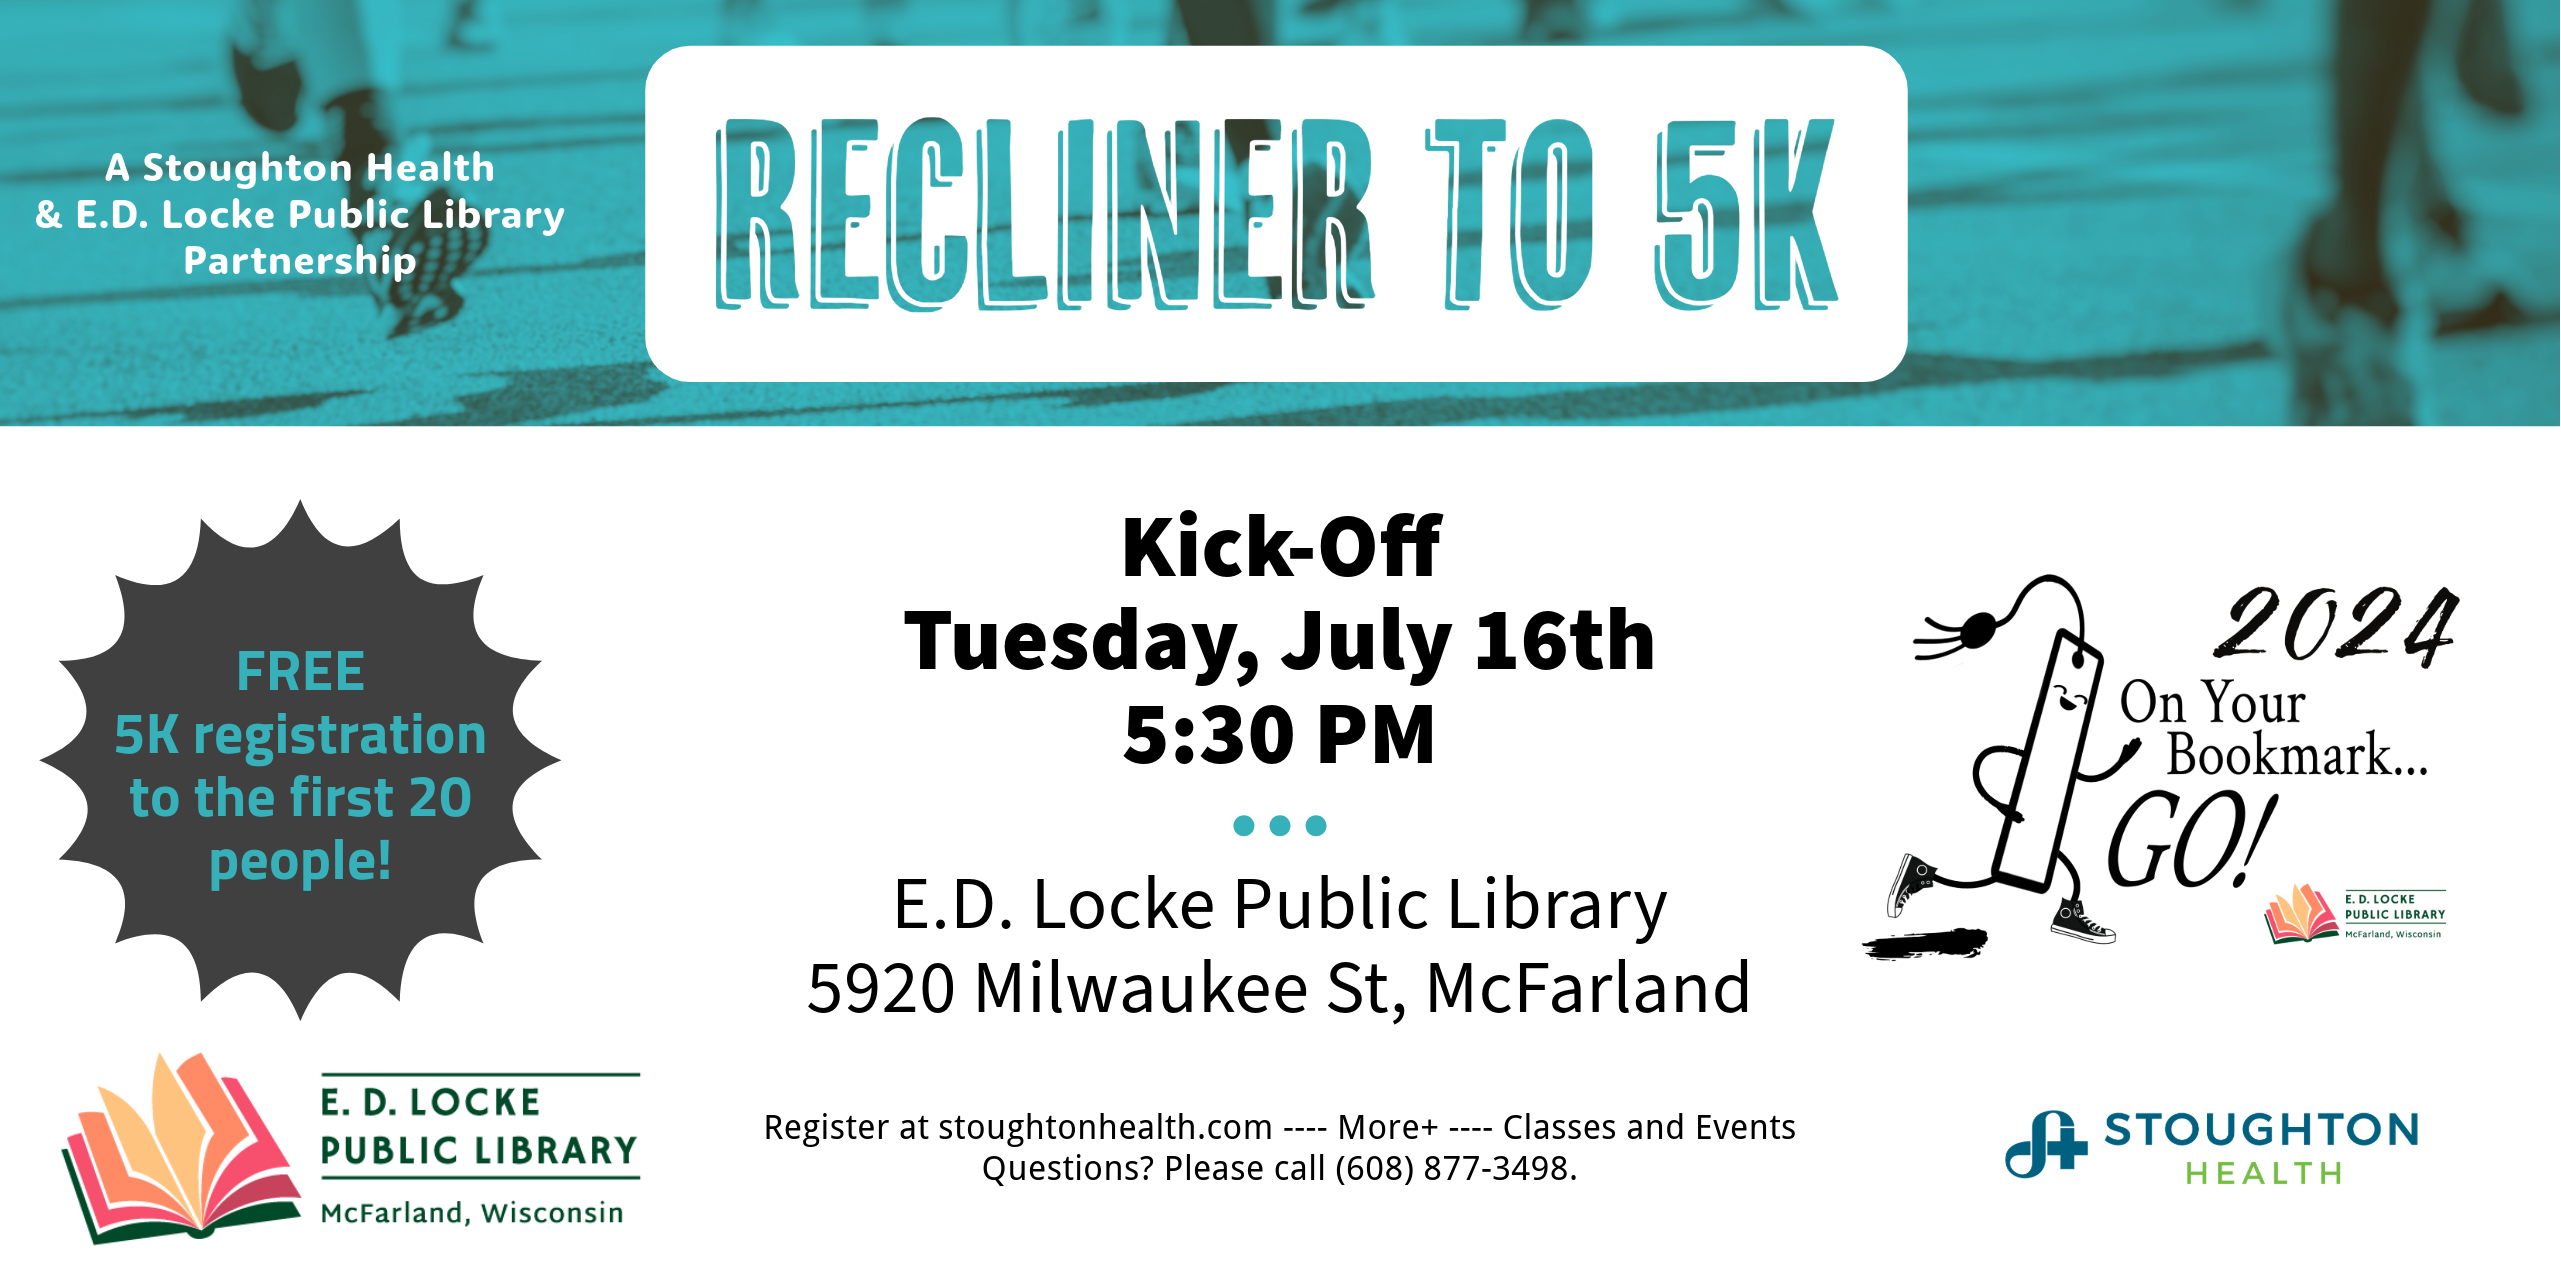 The recliner to 5K kick-off is Tuesday, July 16 starting at 5:30 PM in the Library Community Room.  It's sponsored by Stoughton Health and E.D. Locke Public Library